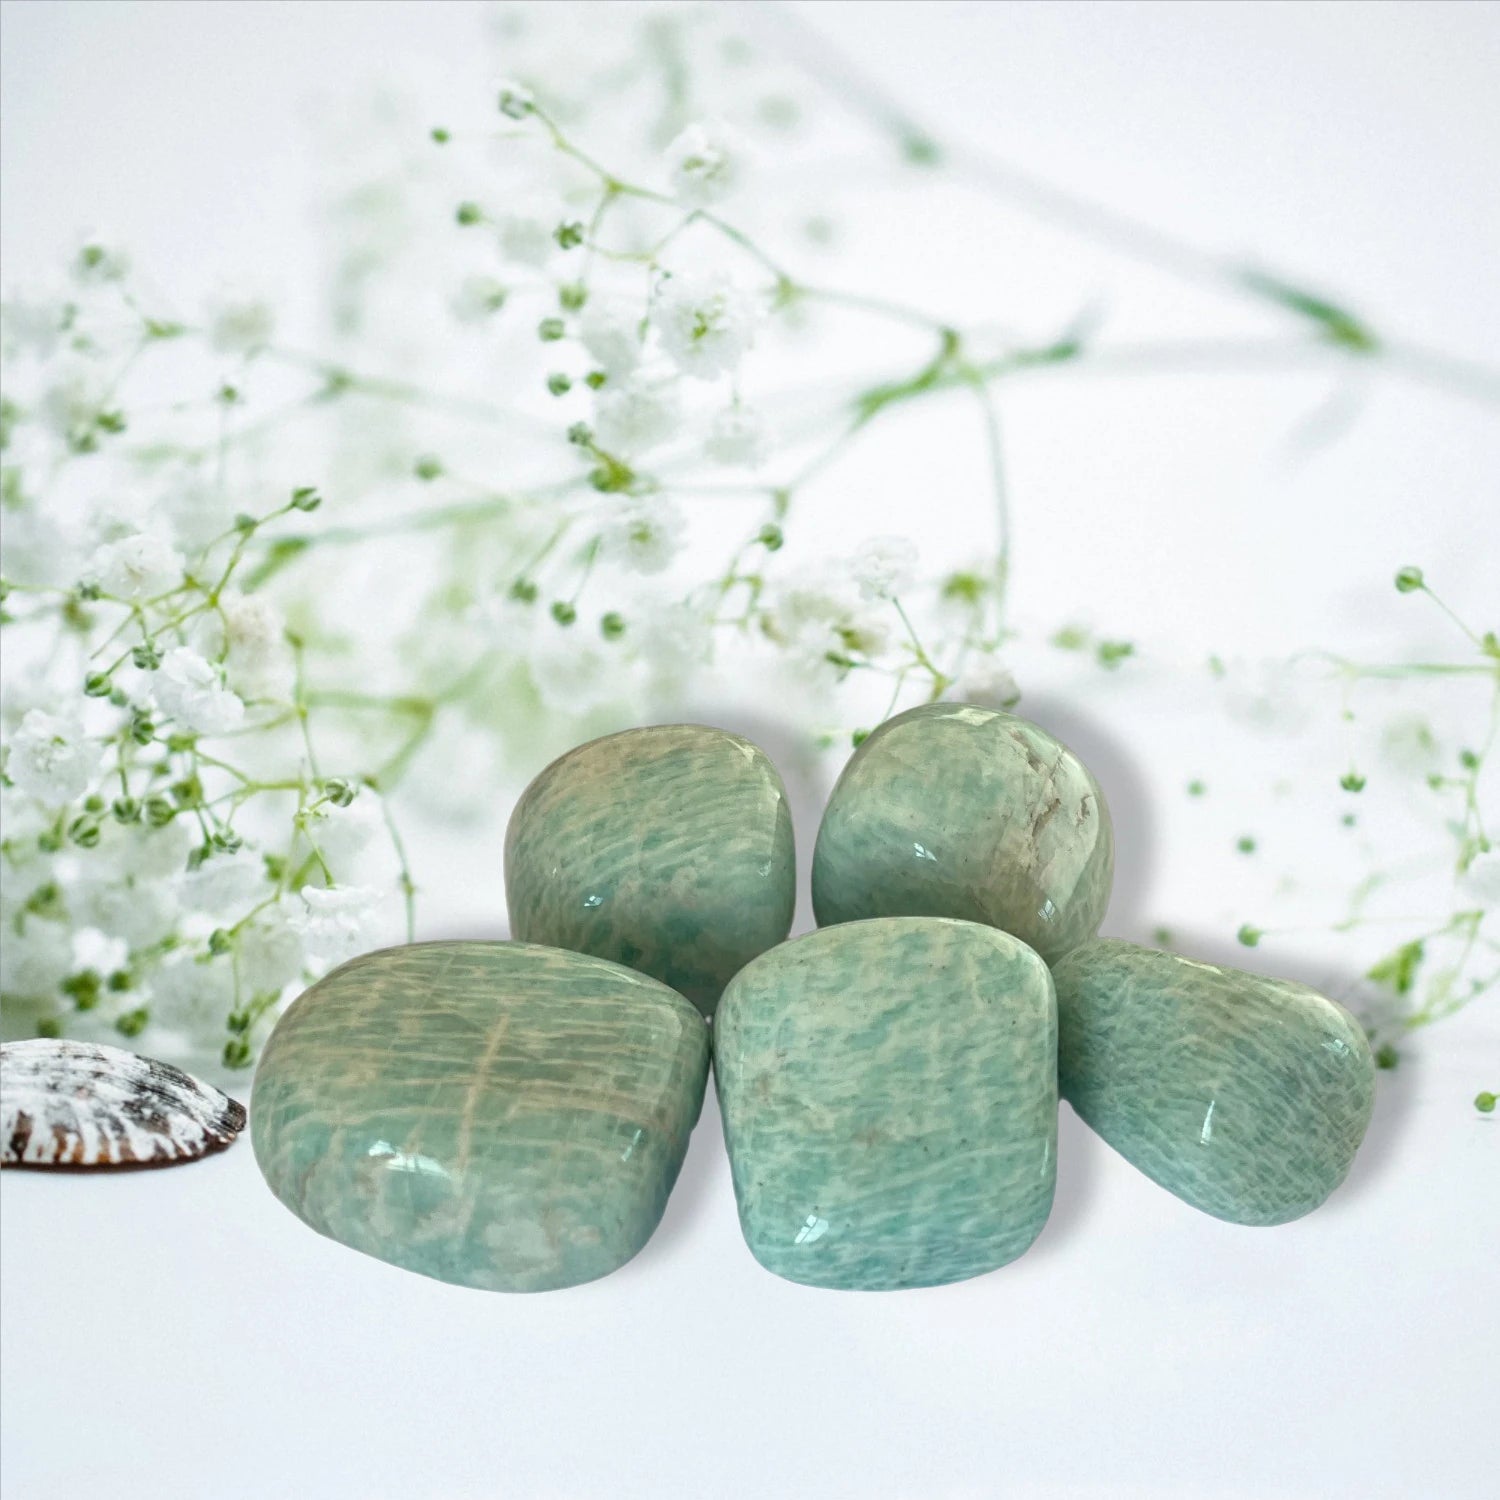 © SASARA • Mindfully-Sourced, High-Quality Amazonite Crystals